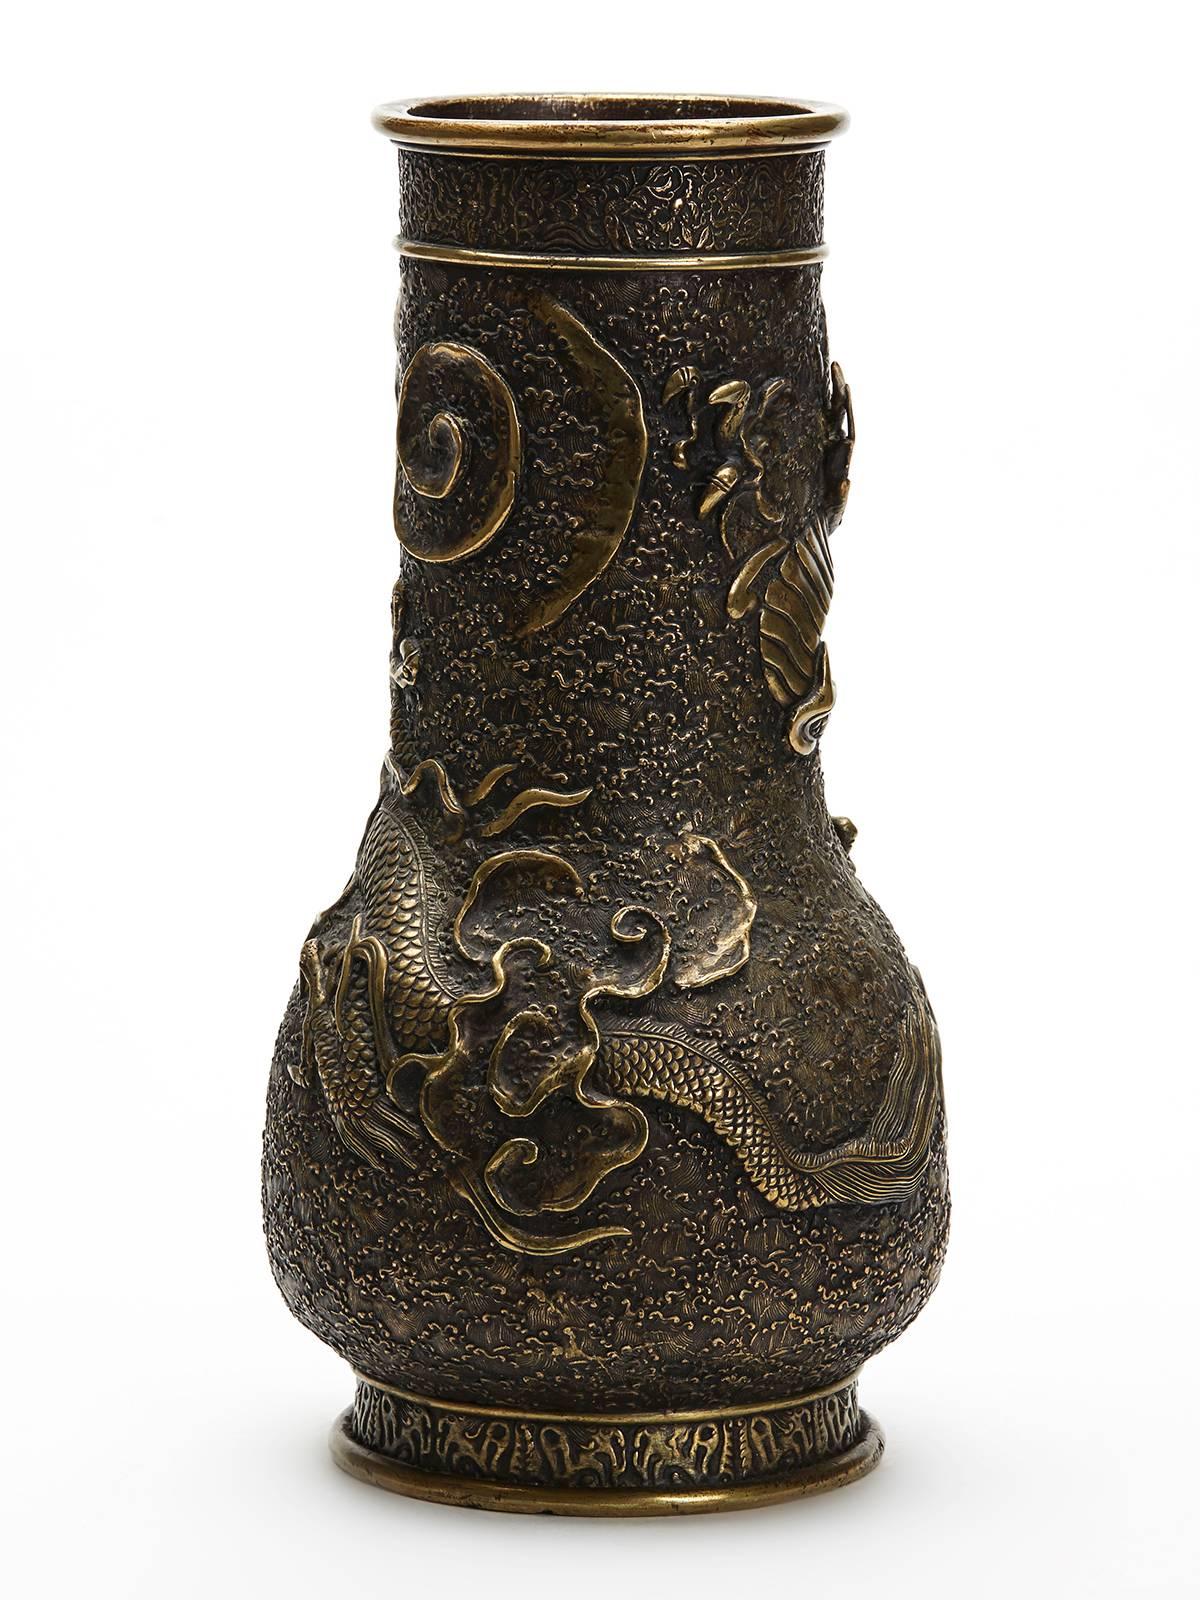 A large and impressive antique Japanese Meiji bronze vase moulded in relief with a scrolling dragon amidst clouds on a fine patterned and textured ground with decorative borders around the top and foot of the vase. The vase has a rounded bulbous